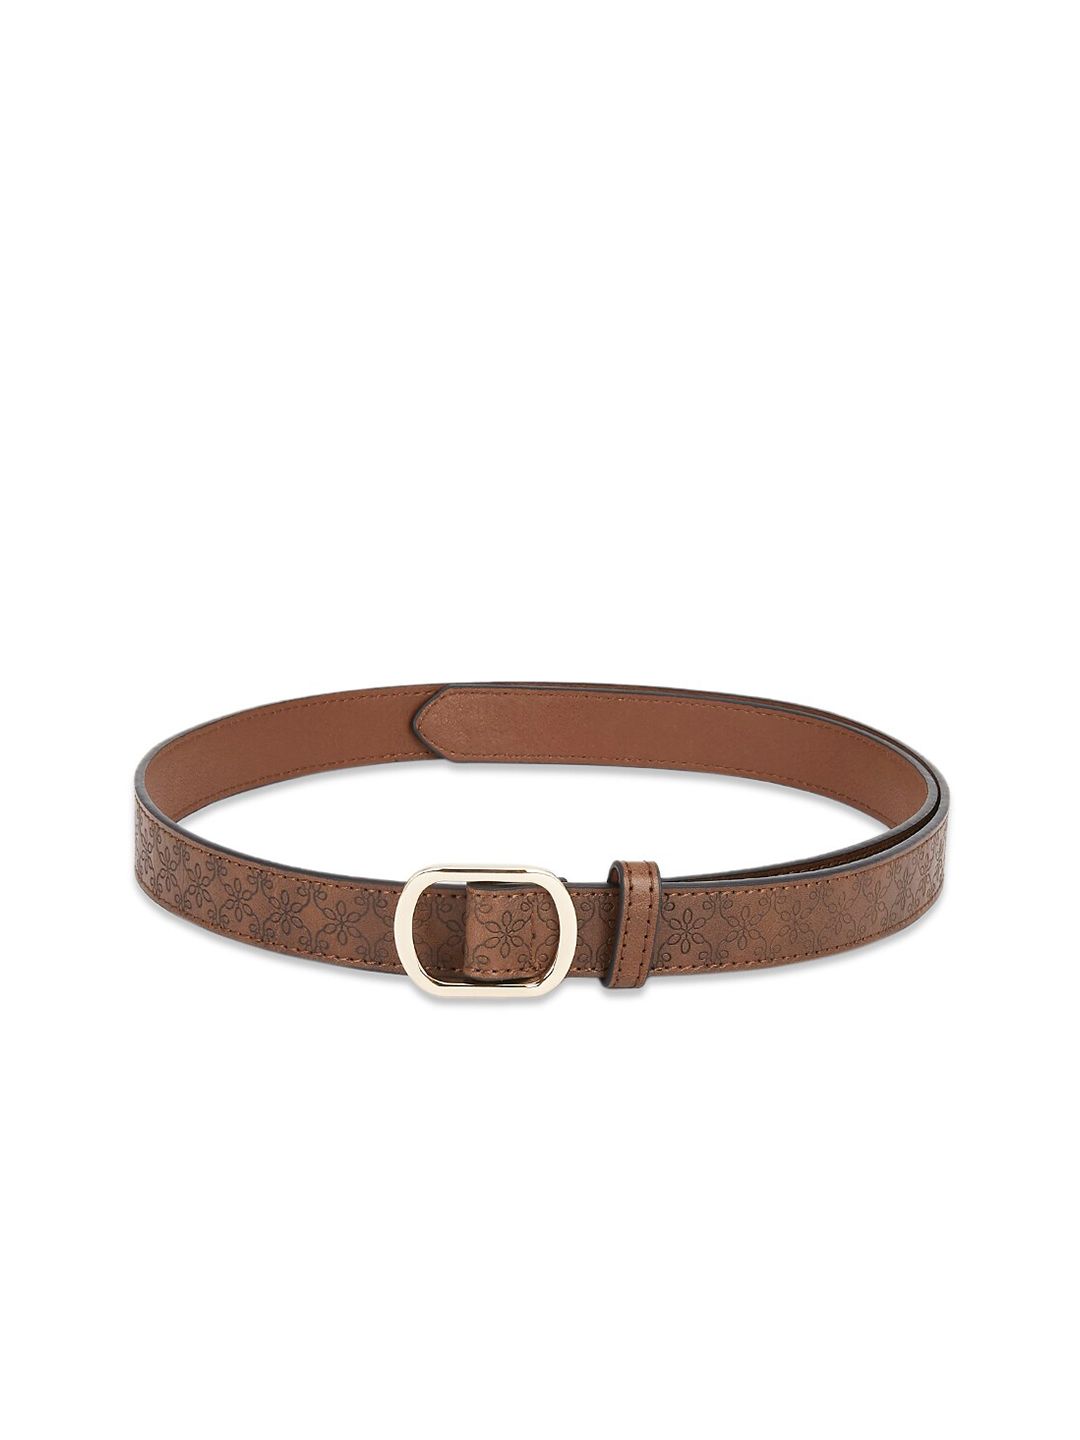 Forever Glam by Pantaloons Women Brown Textured PU Belt Price in India